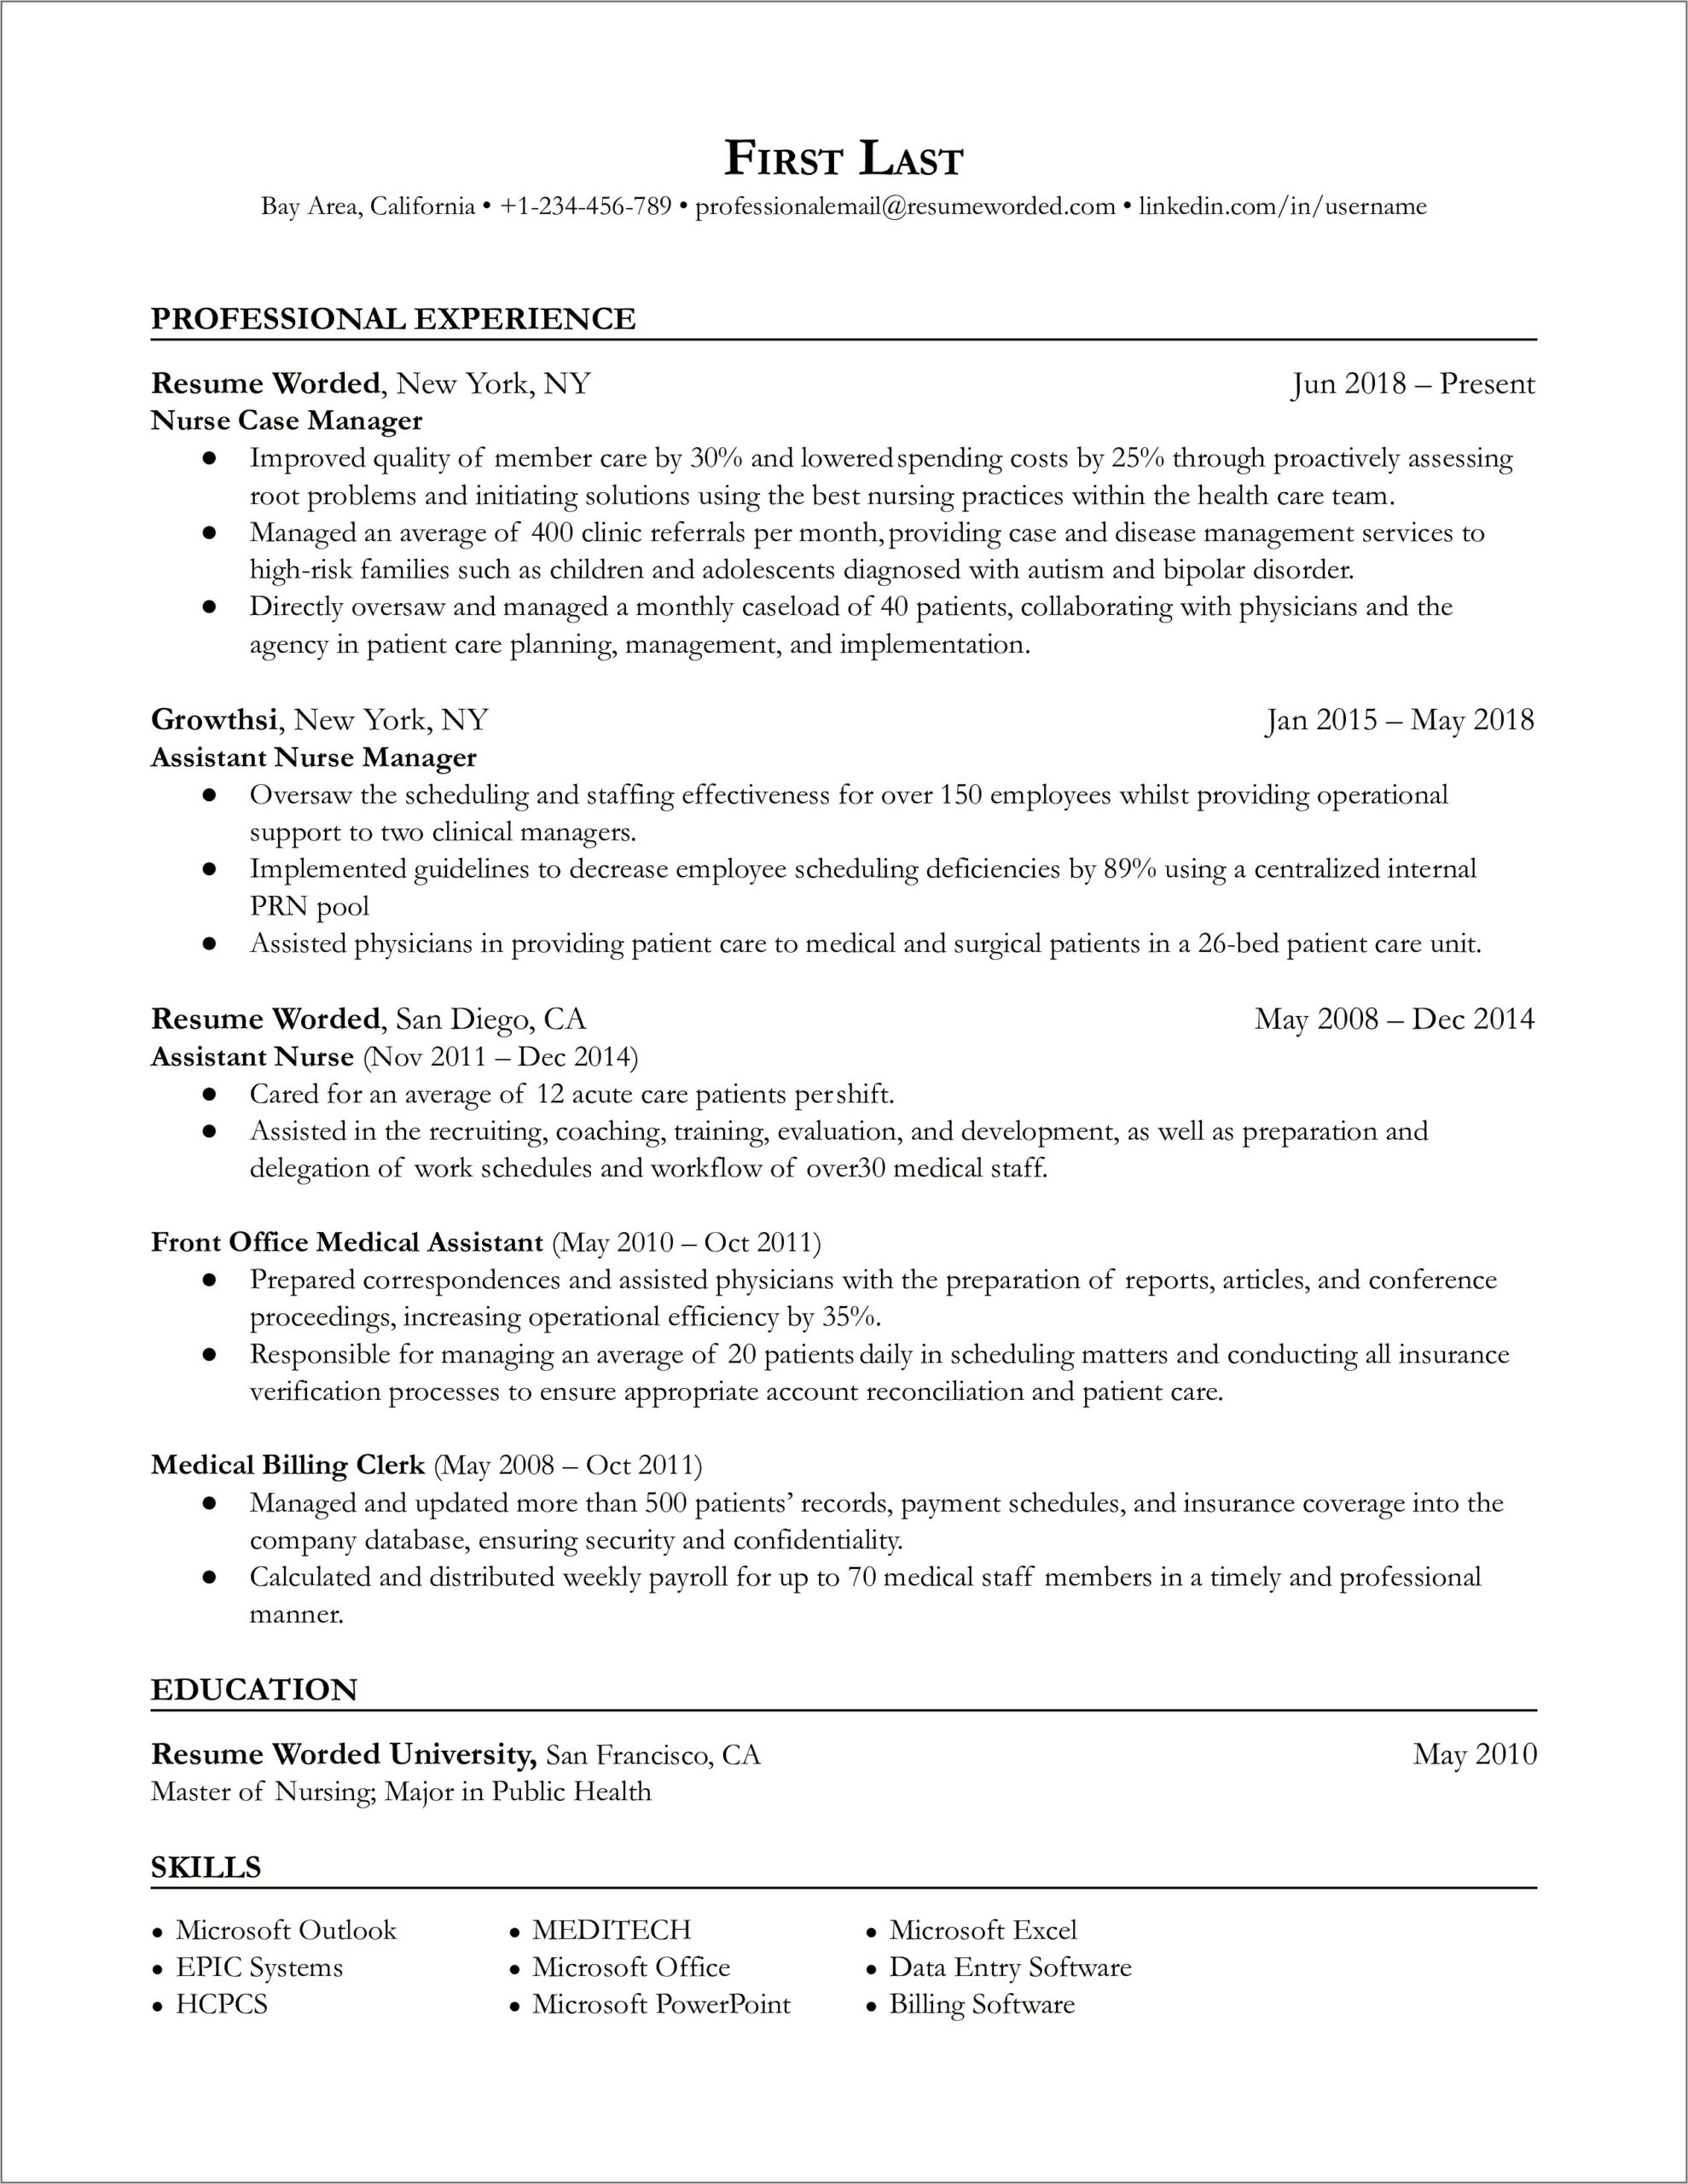 Sample Professional Resume For A Nurse Manager